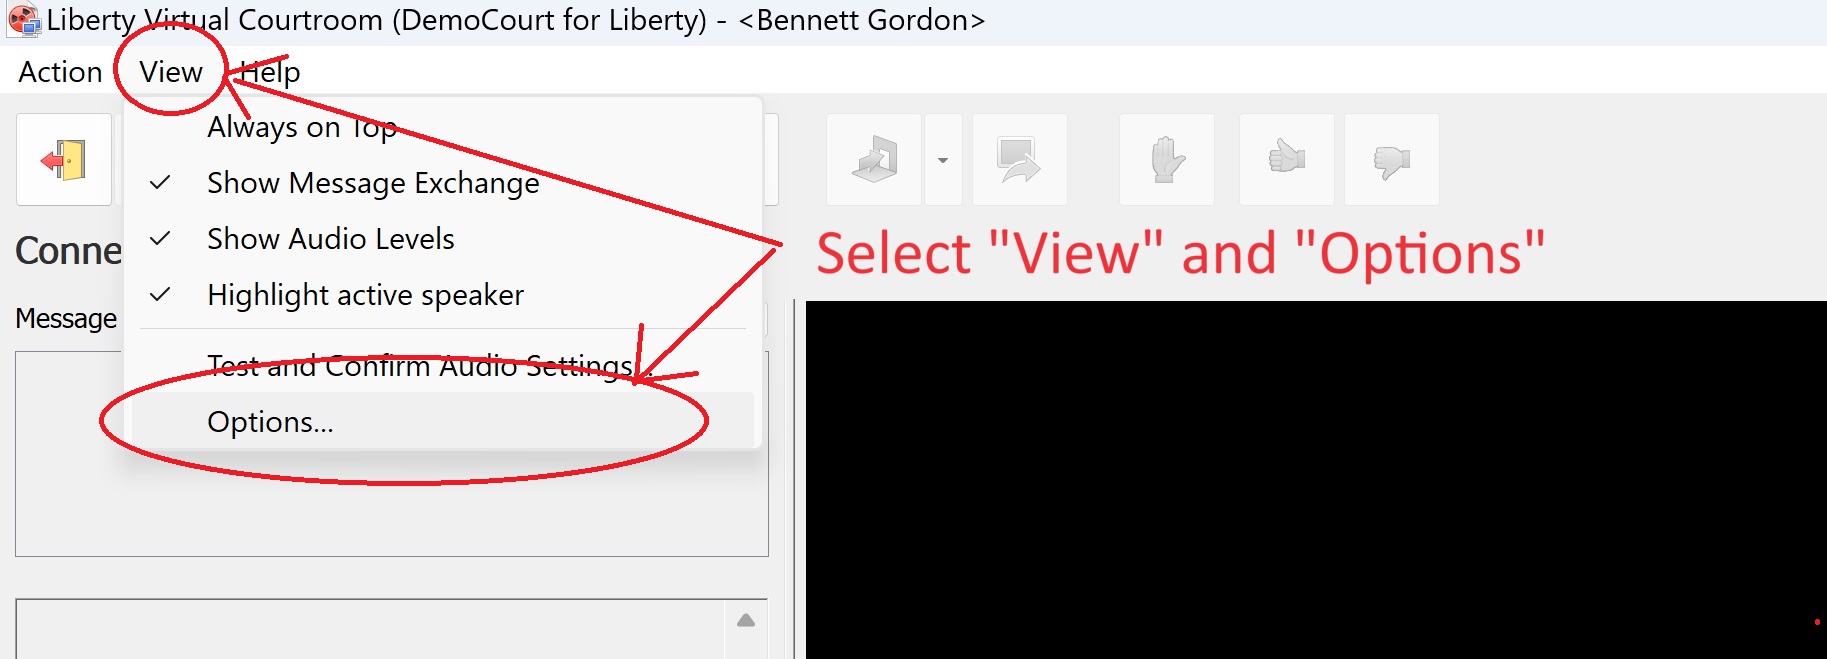 Select Options from the View Drop-down menu